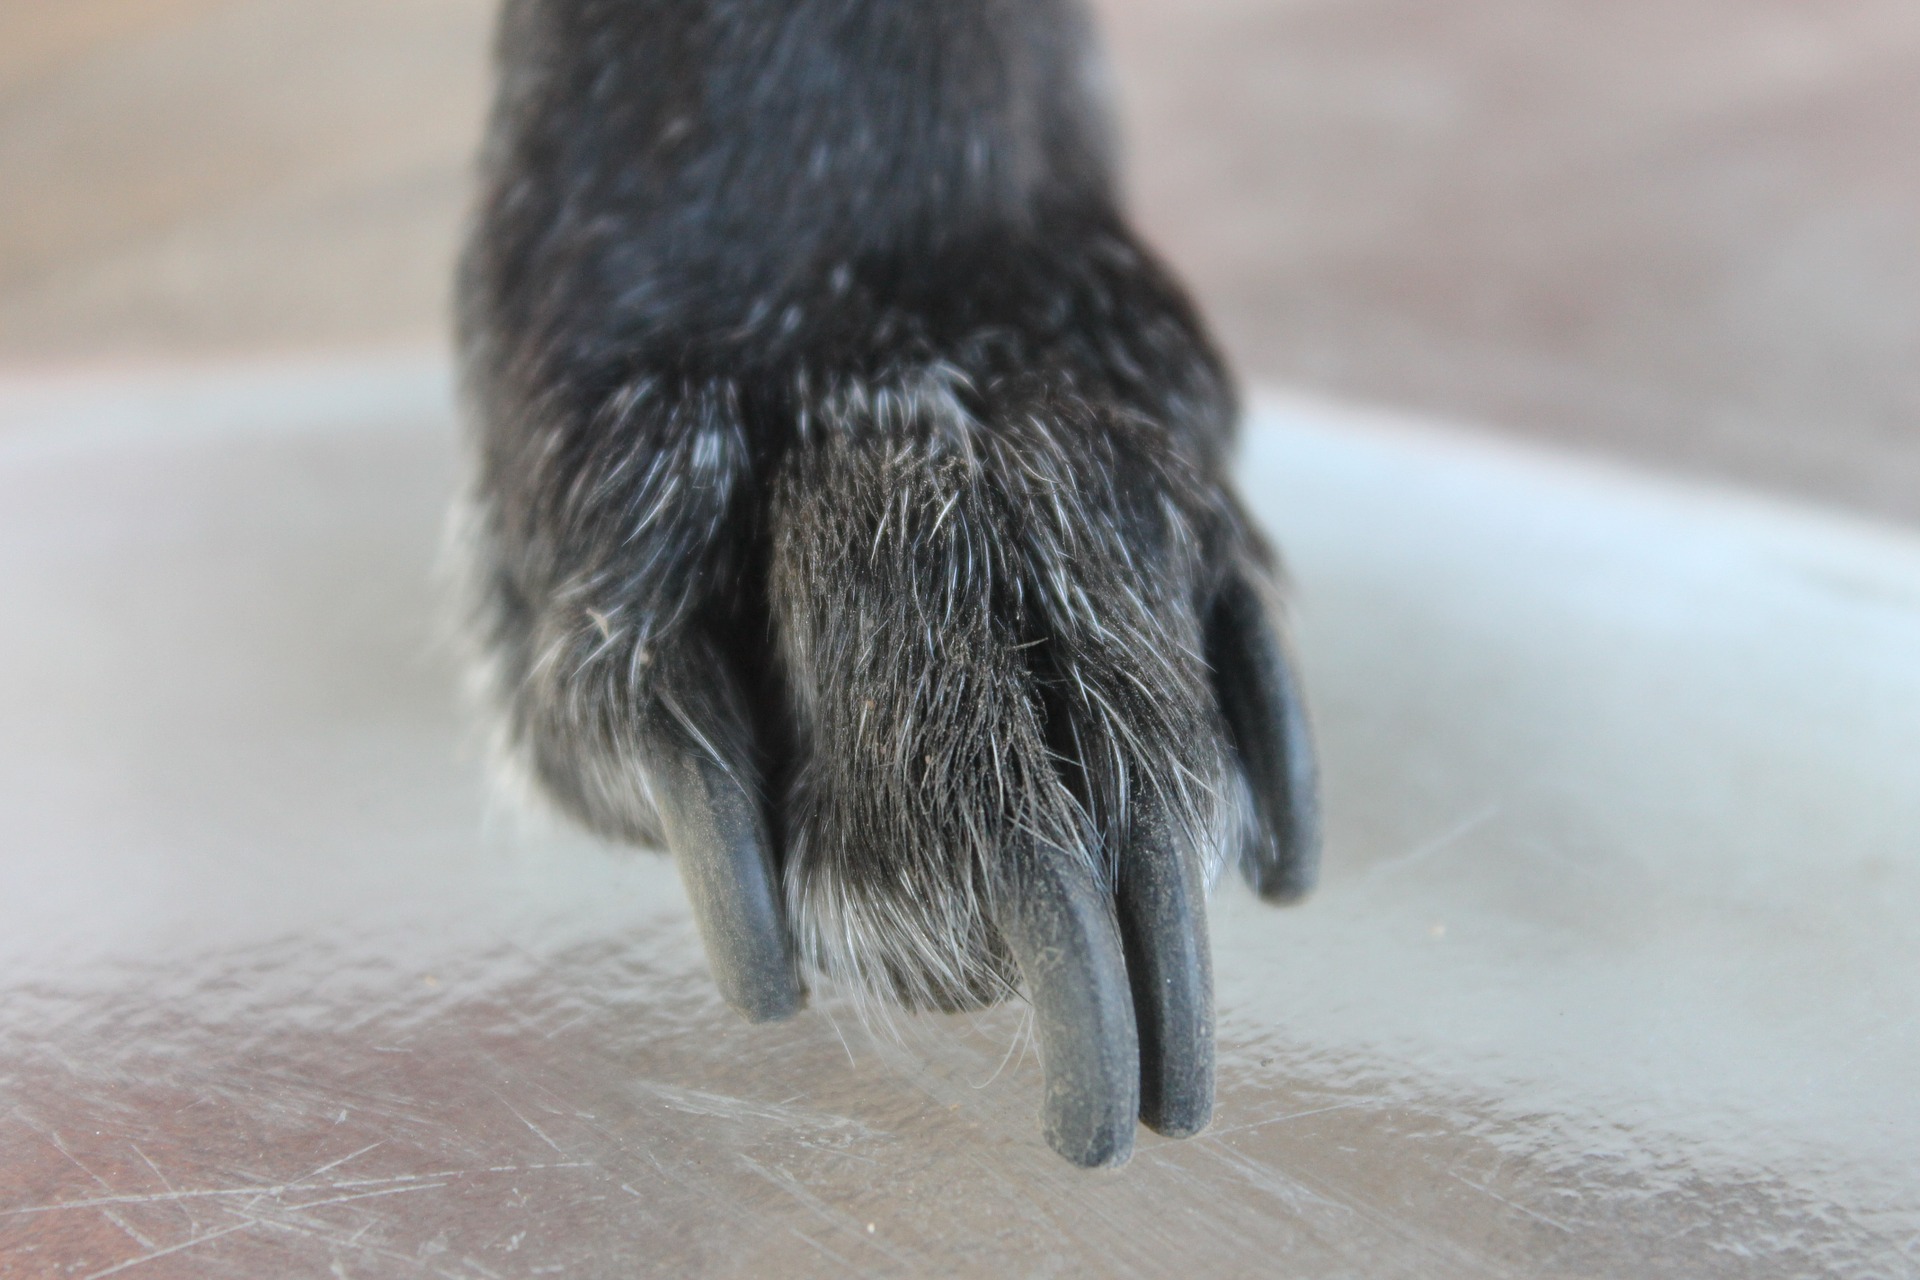 Cut your dog's nails when they get too long